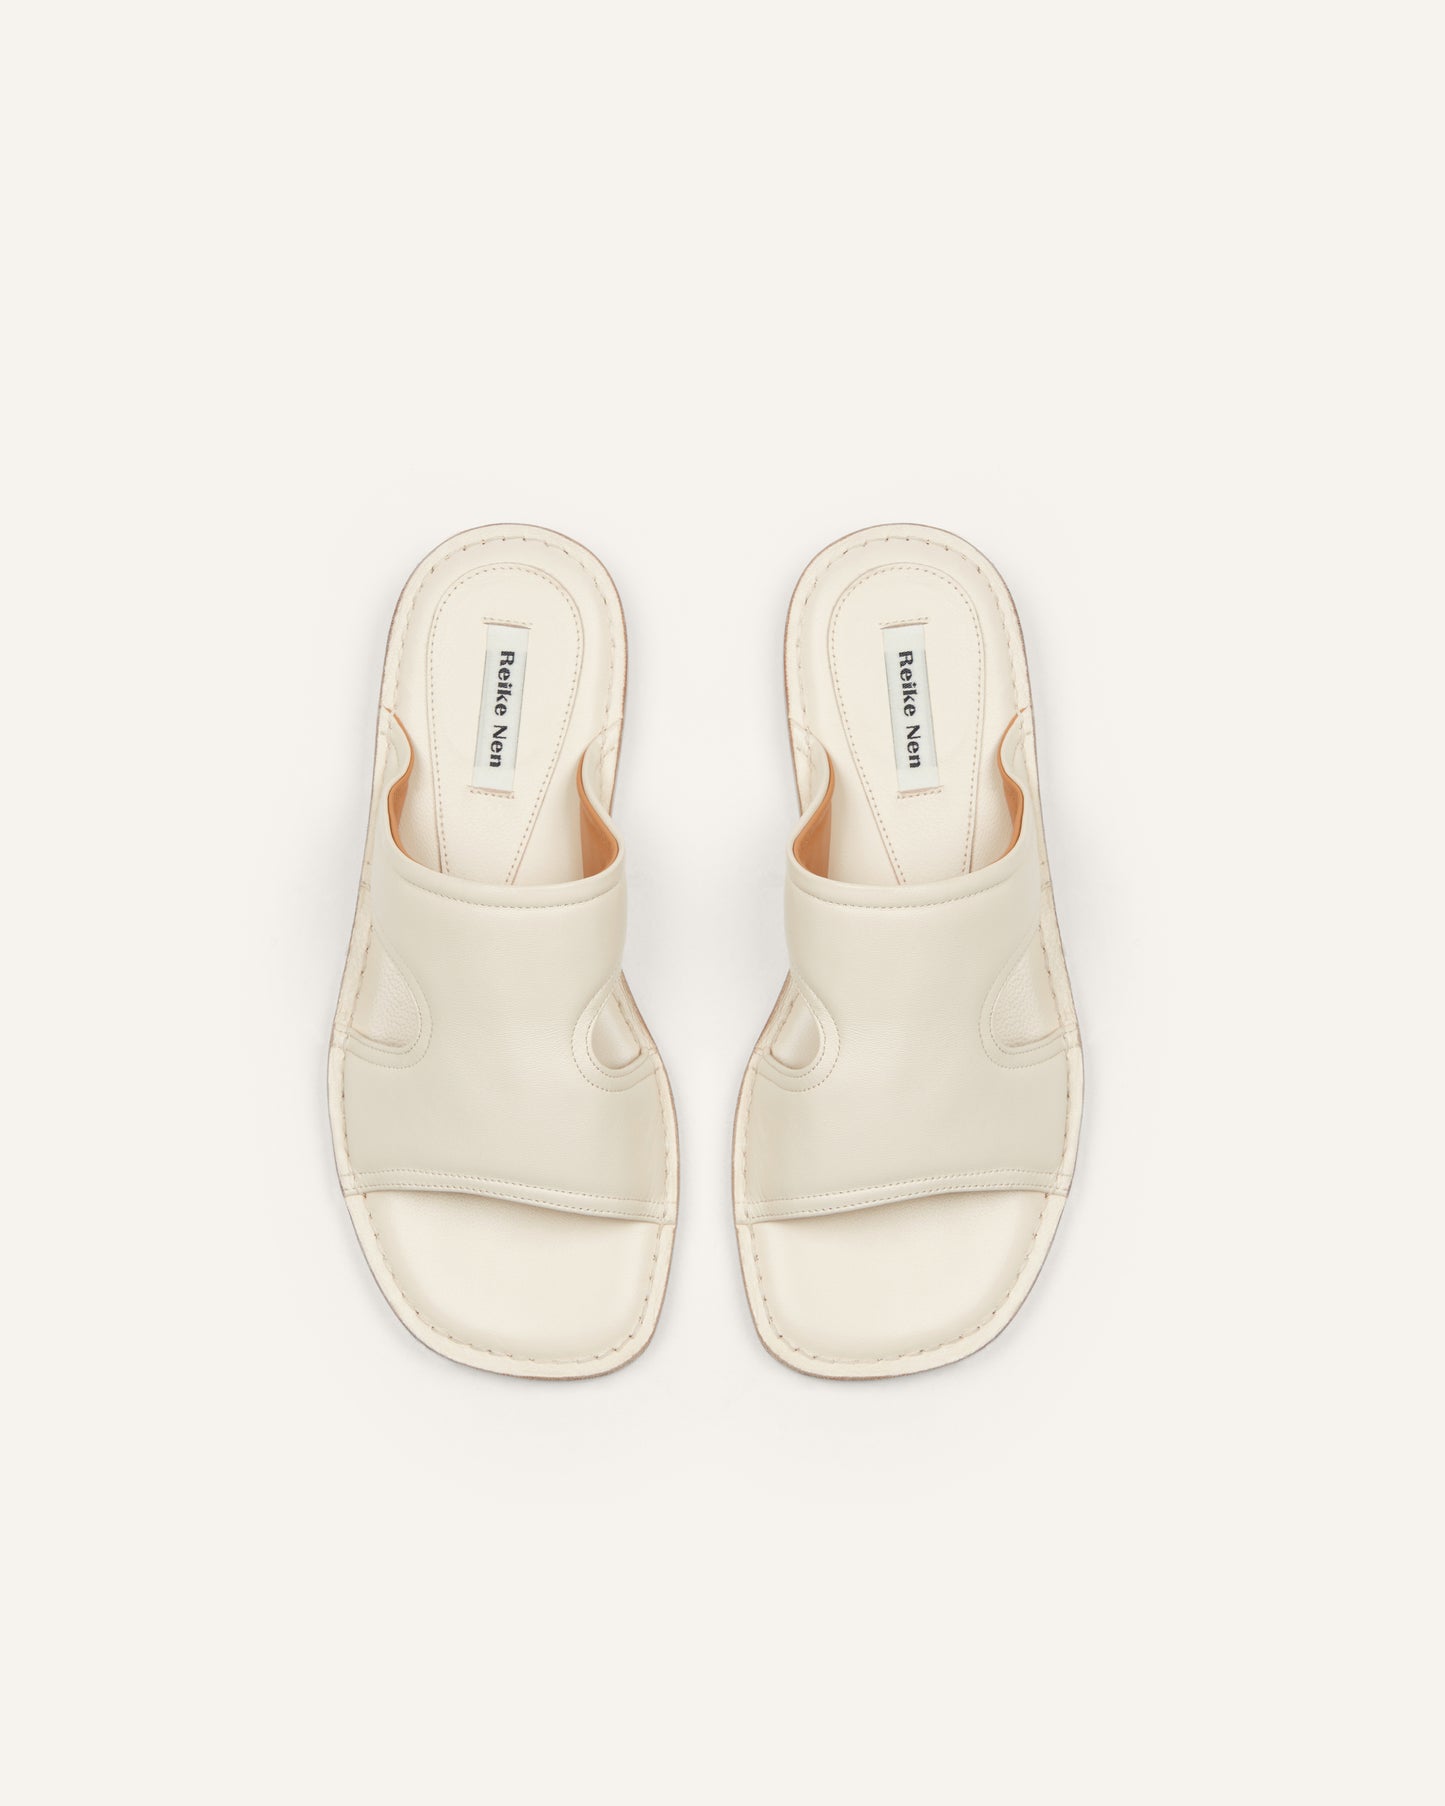 Padded Cut-Out Slides